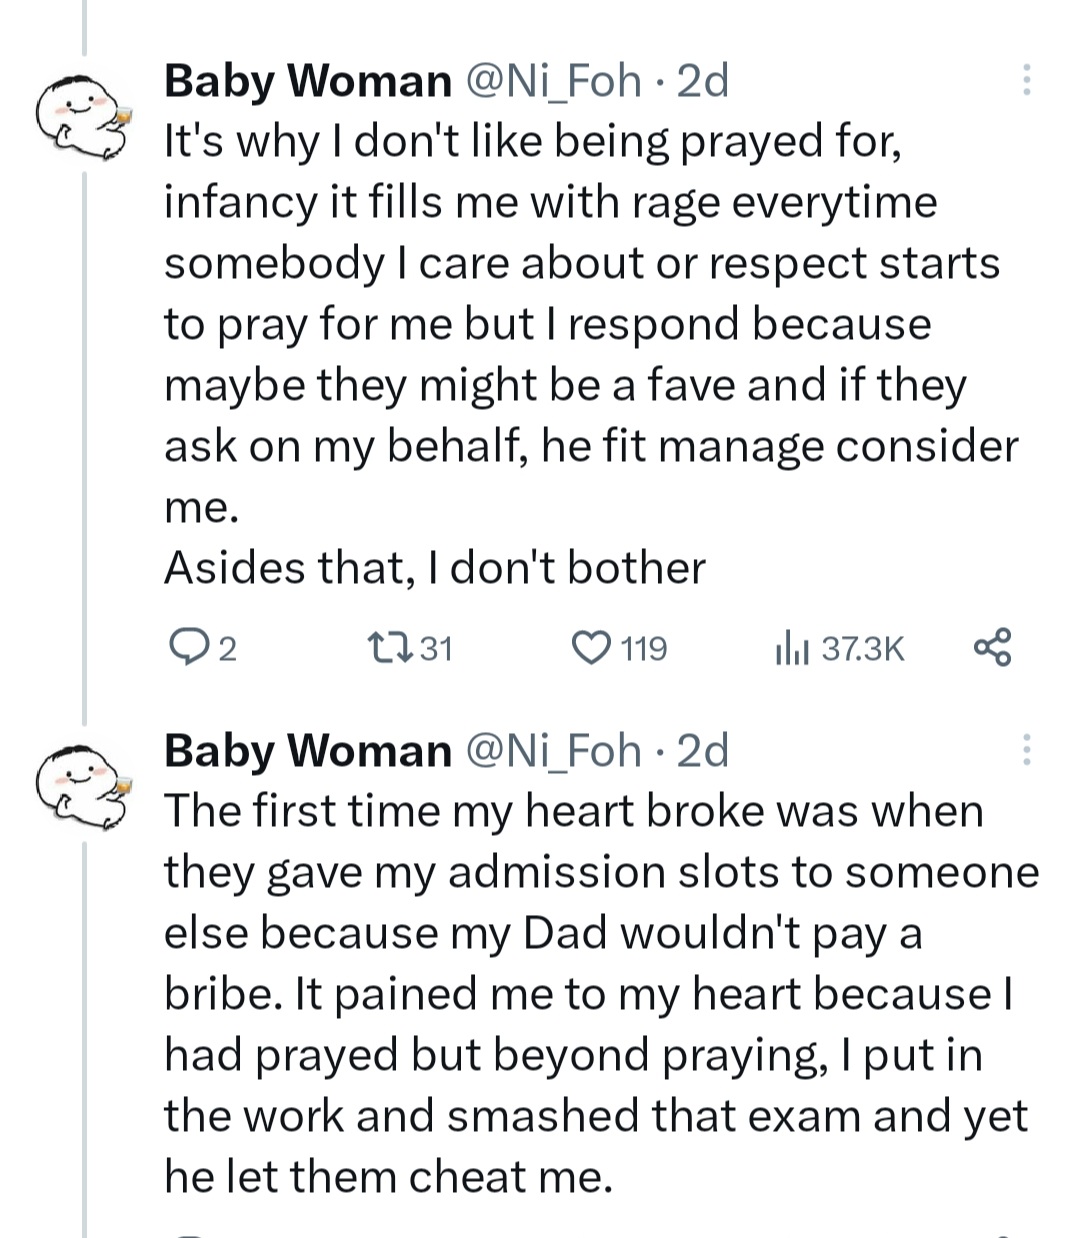 Lady reveals why she stopped being a Christian